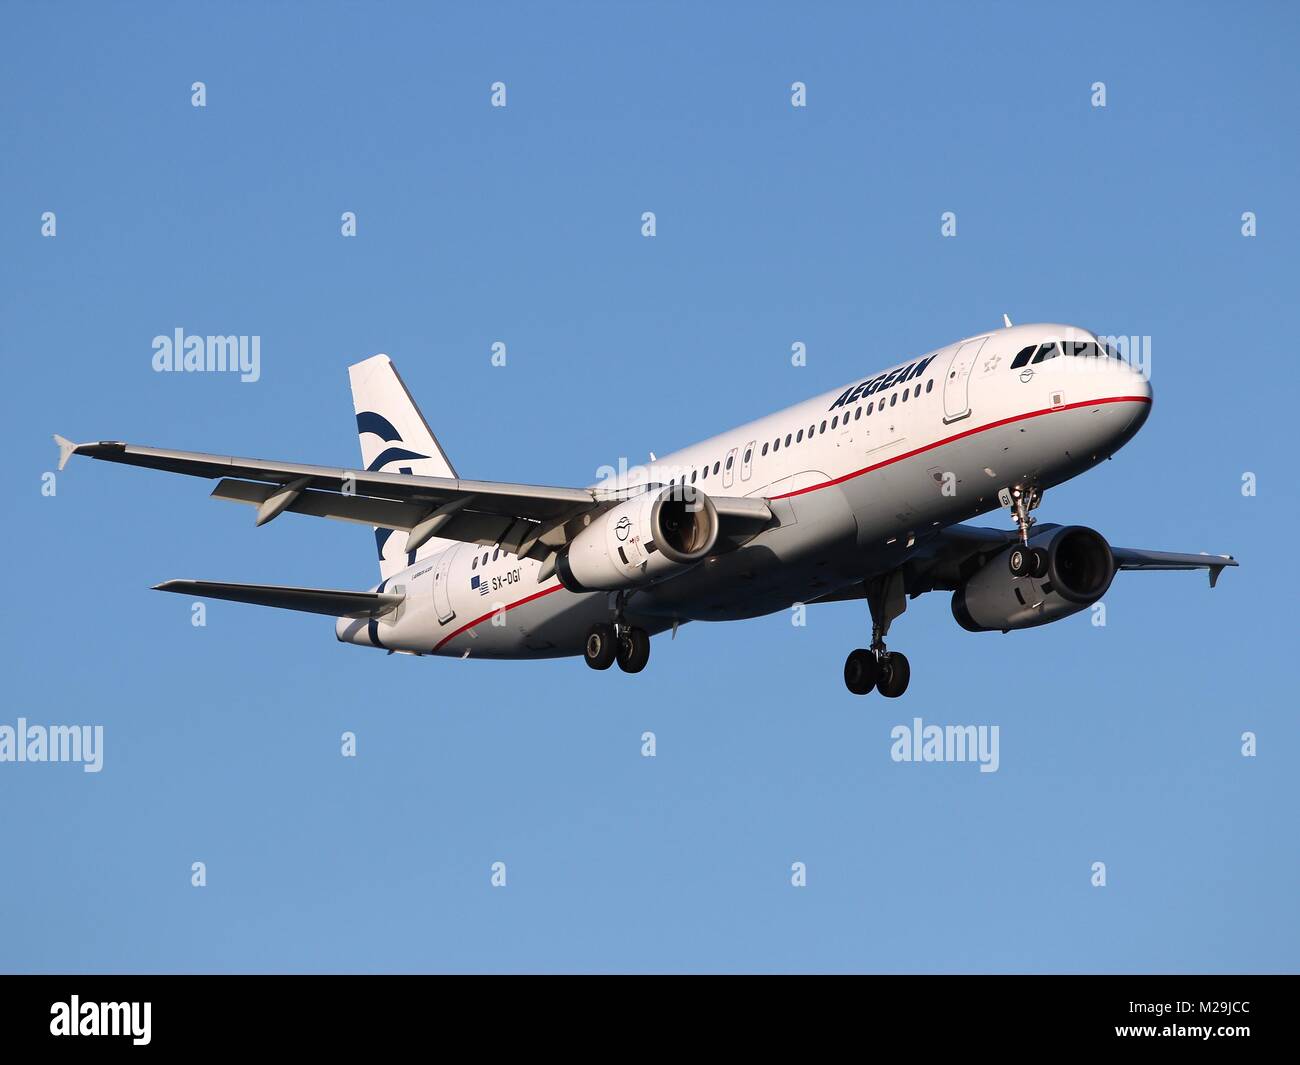 LARNACA, CYPRUS - MAY 17, 2014: Aegean Airlines Airbus A320 lands in Larnaca International Airport. It is the largest Greek airline and carried 6.9 mi Stock Photo